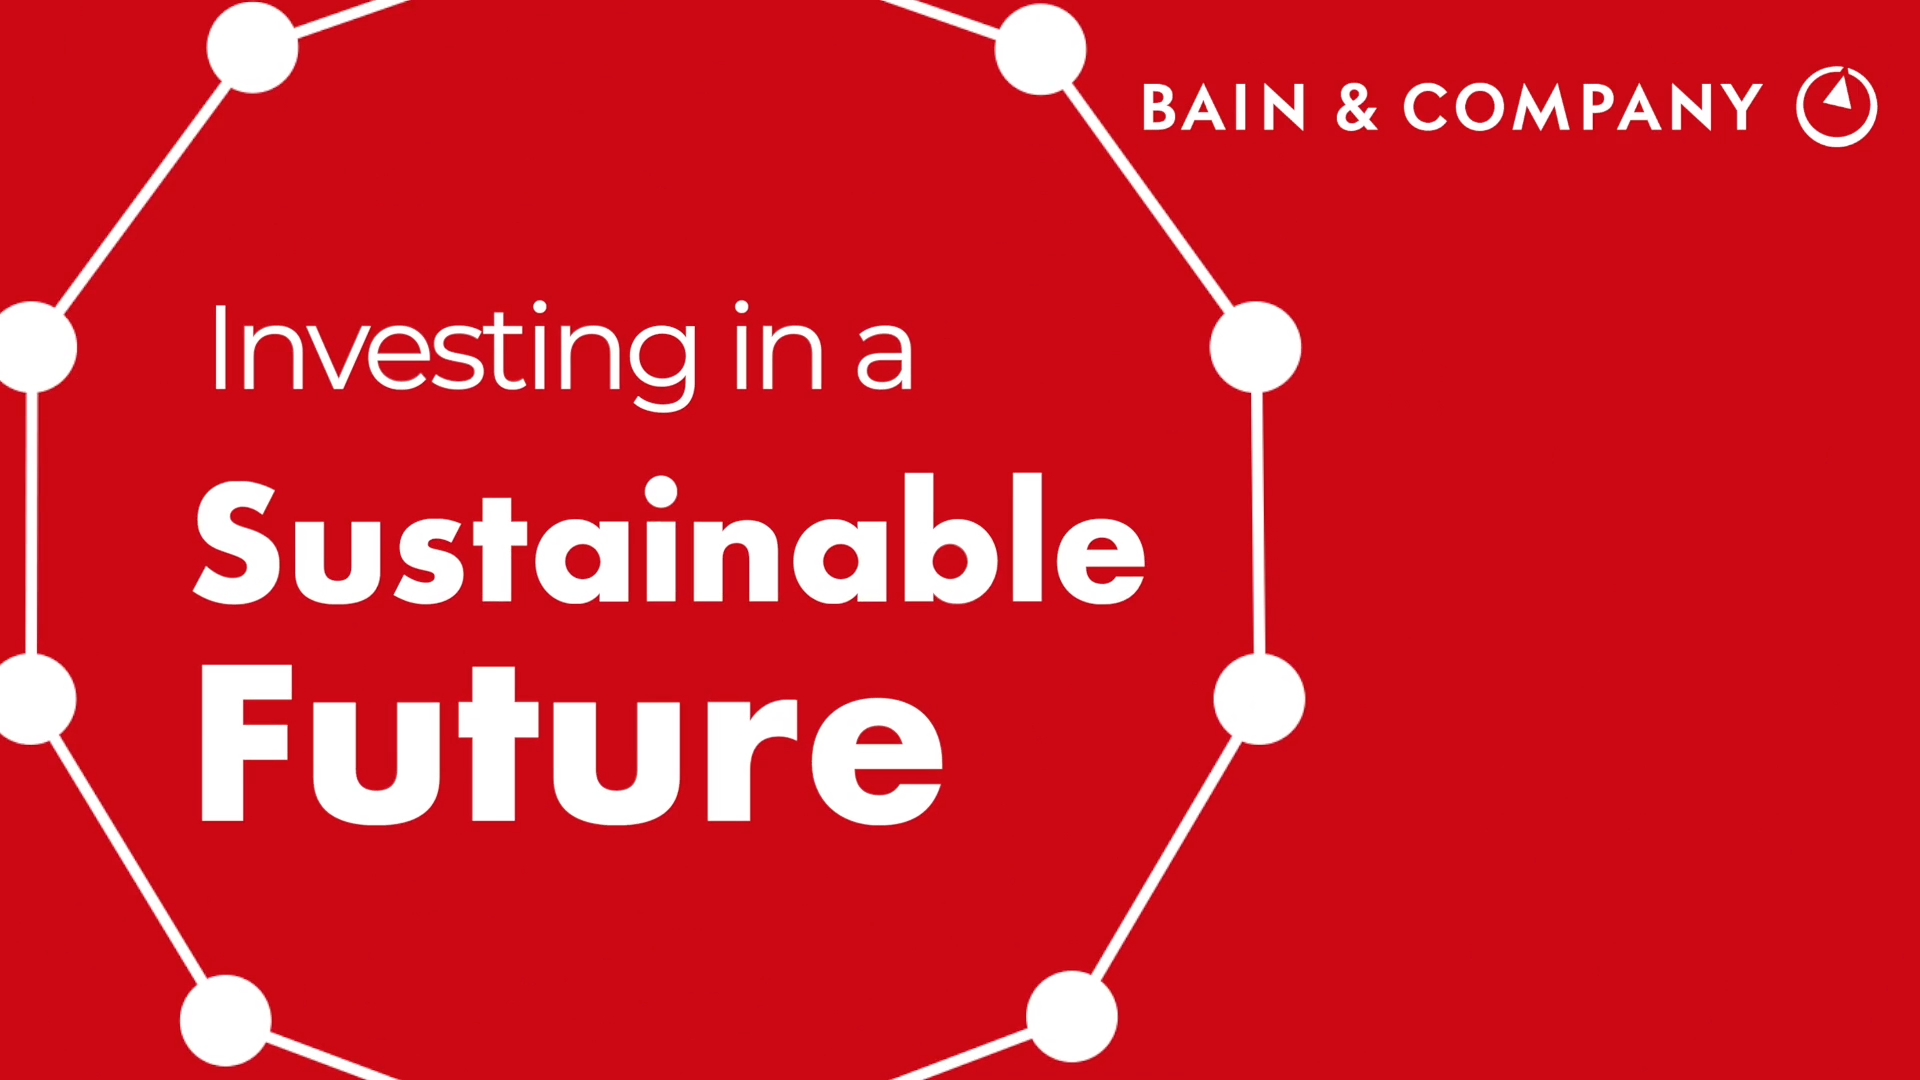 Investing in a Sustainable Future | Bain & Company